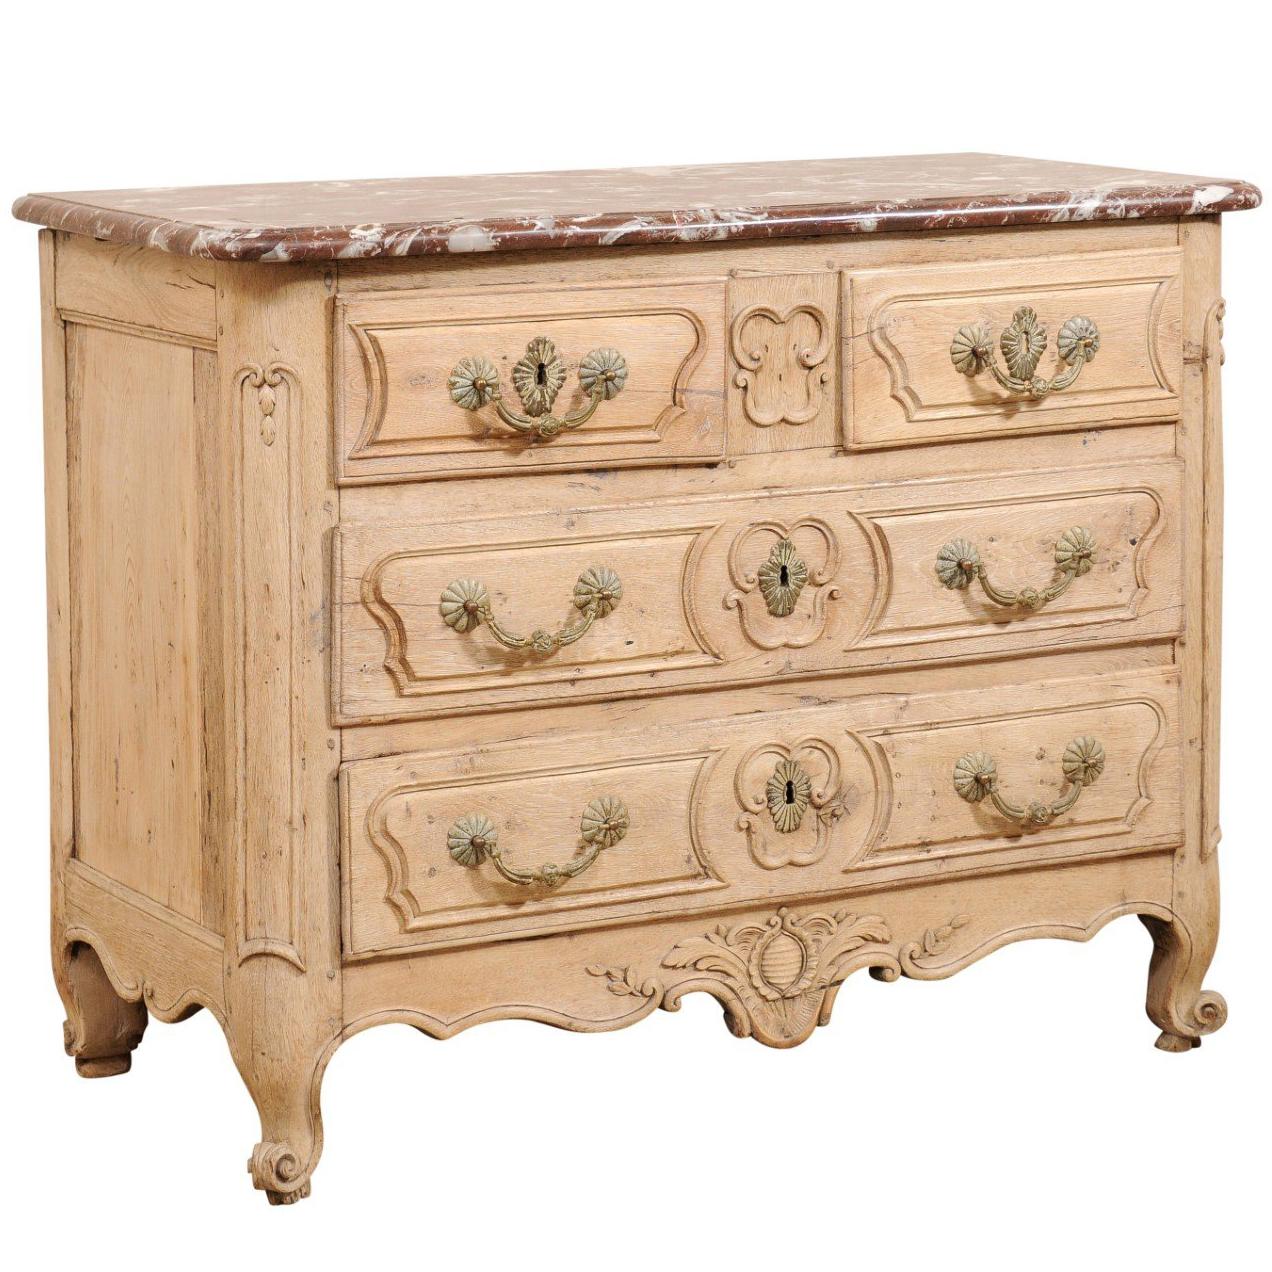 An 18th Century French Louis XV Provincial Four-Drawer Marble Top Wood Chest For Sale